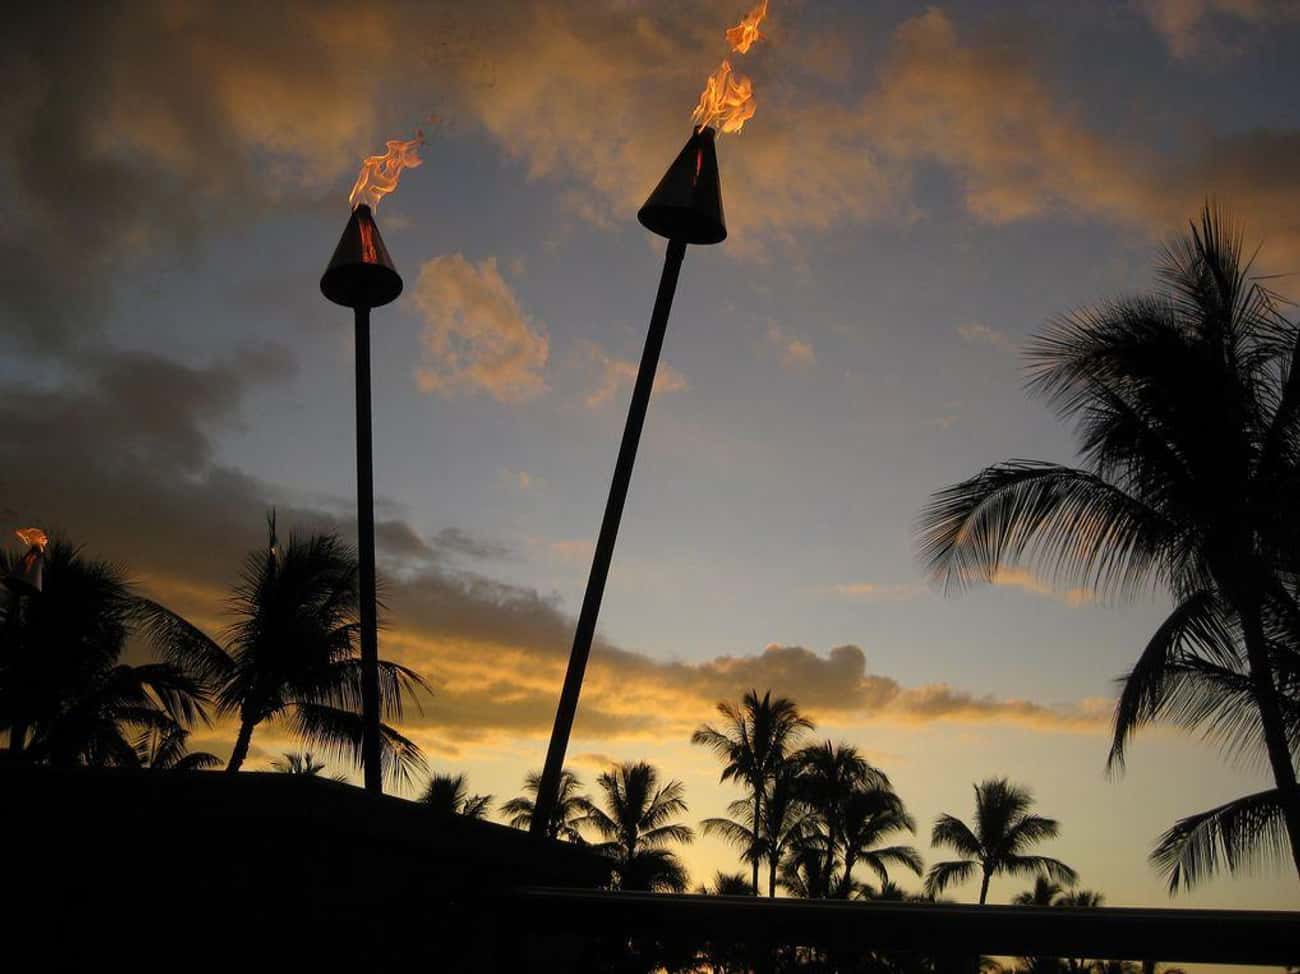 Hawaii's Legendary Night Marchers Patrol The Islands In The Afterlife